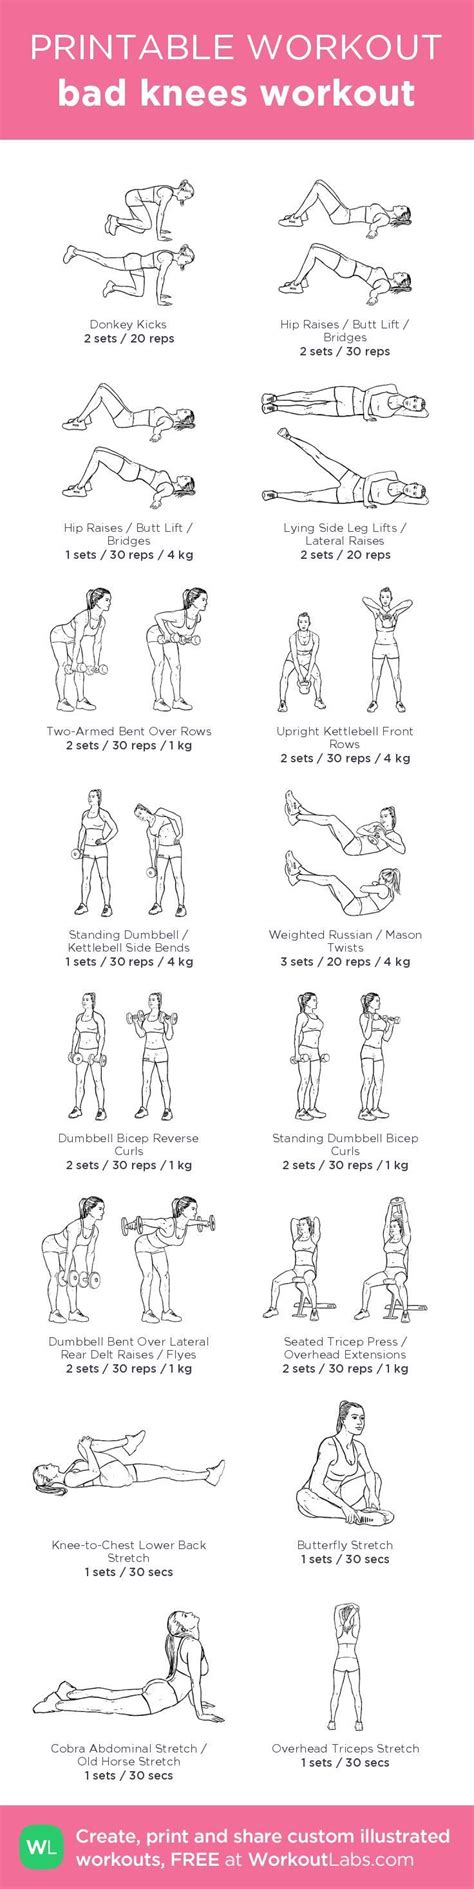 Bad Knees Workout Illustrated Exercise Plan Created At